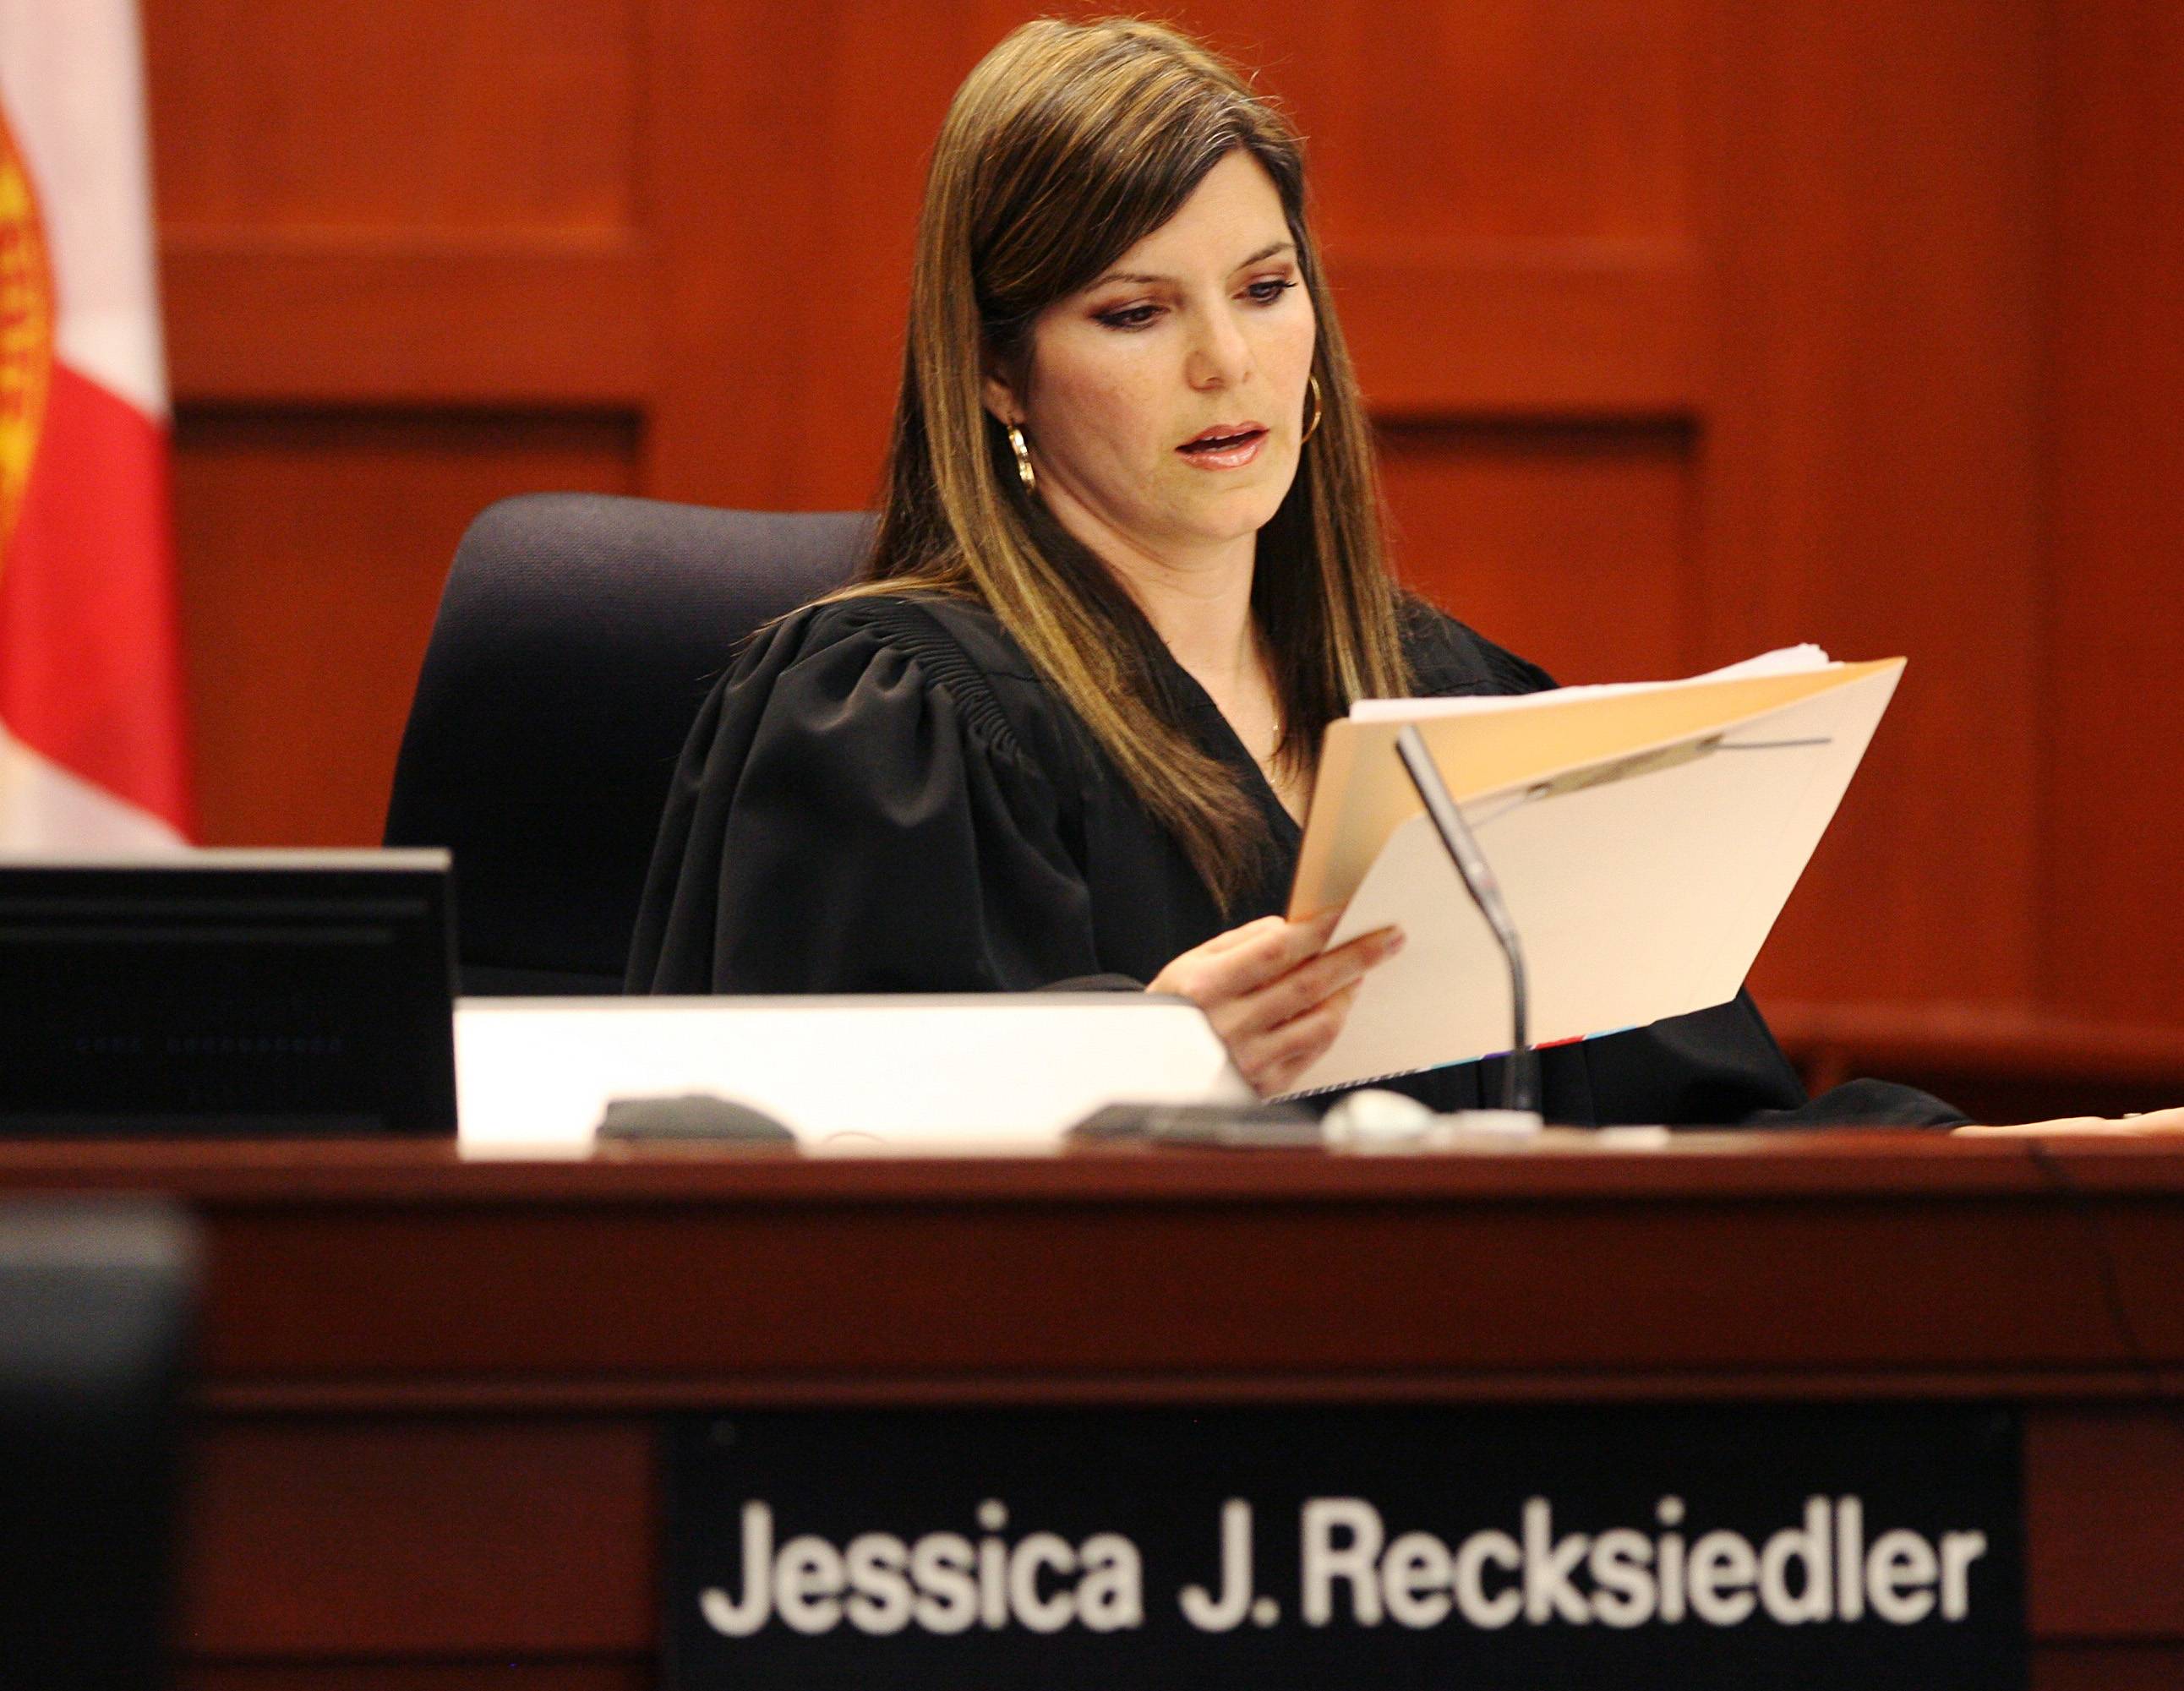 Judge Jessica Recksiedler - Judge Jessica Recksiedler recused herself from the case on April 18, citing a possible a conflict of interest. Just days before, Mark O’Mara filed a petition to remove her because she is married to the law partner of Mark NeJame, who had been approached by Zimmerman's family to him. NeJame is now a CNN legal analyst on the case.&nbsp;(Photo: Tom Benitez/The Orlando Sentinel-Pool/Getty Images)